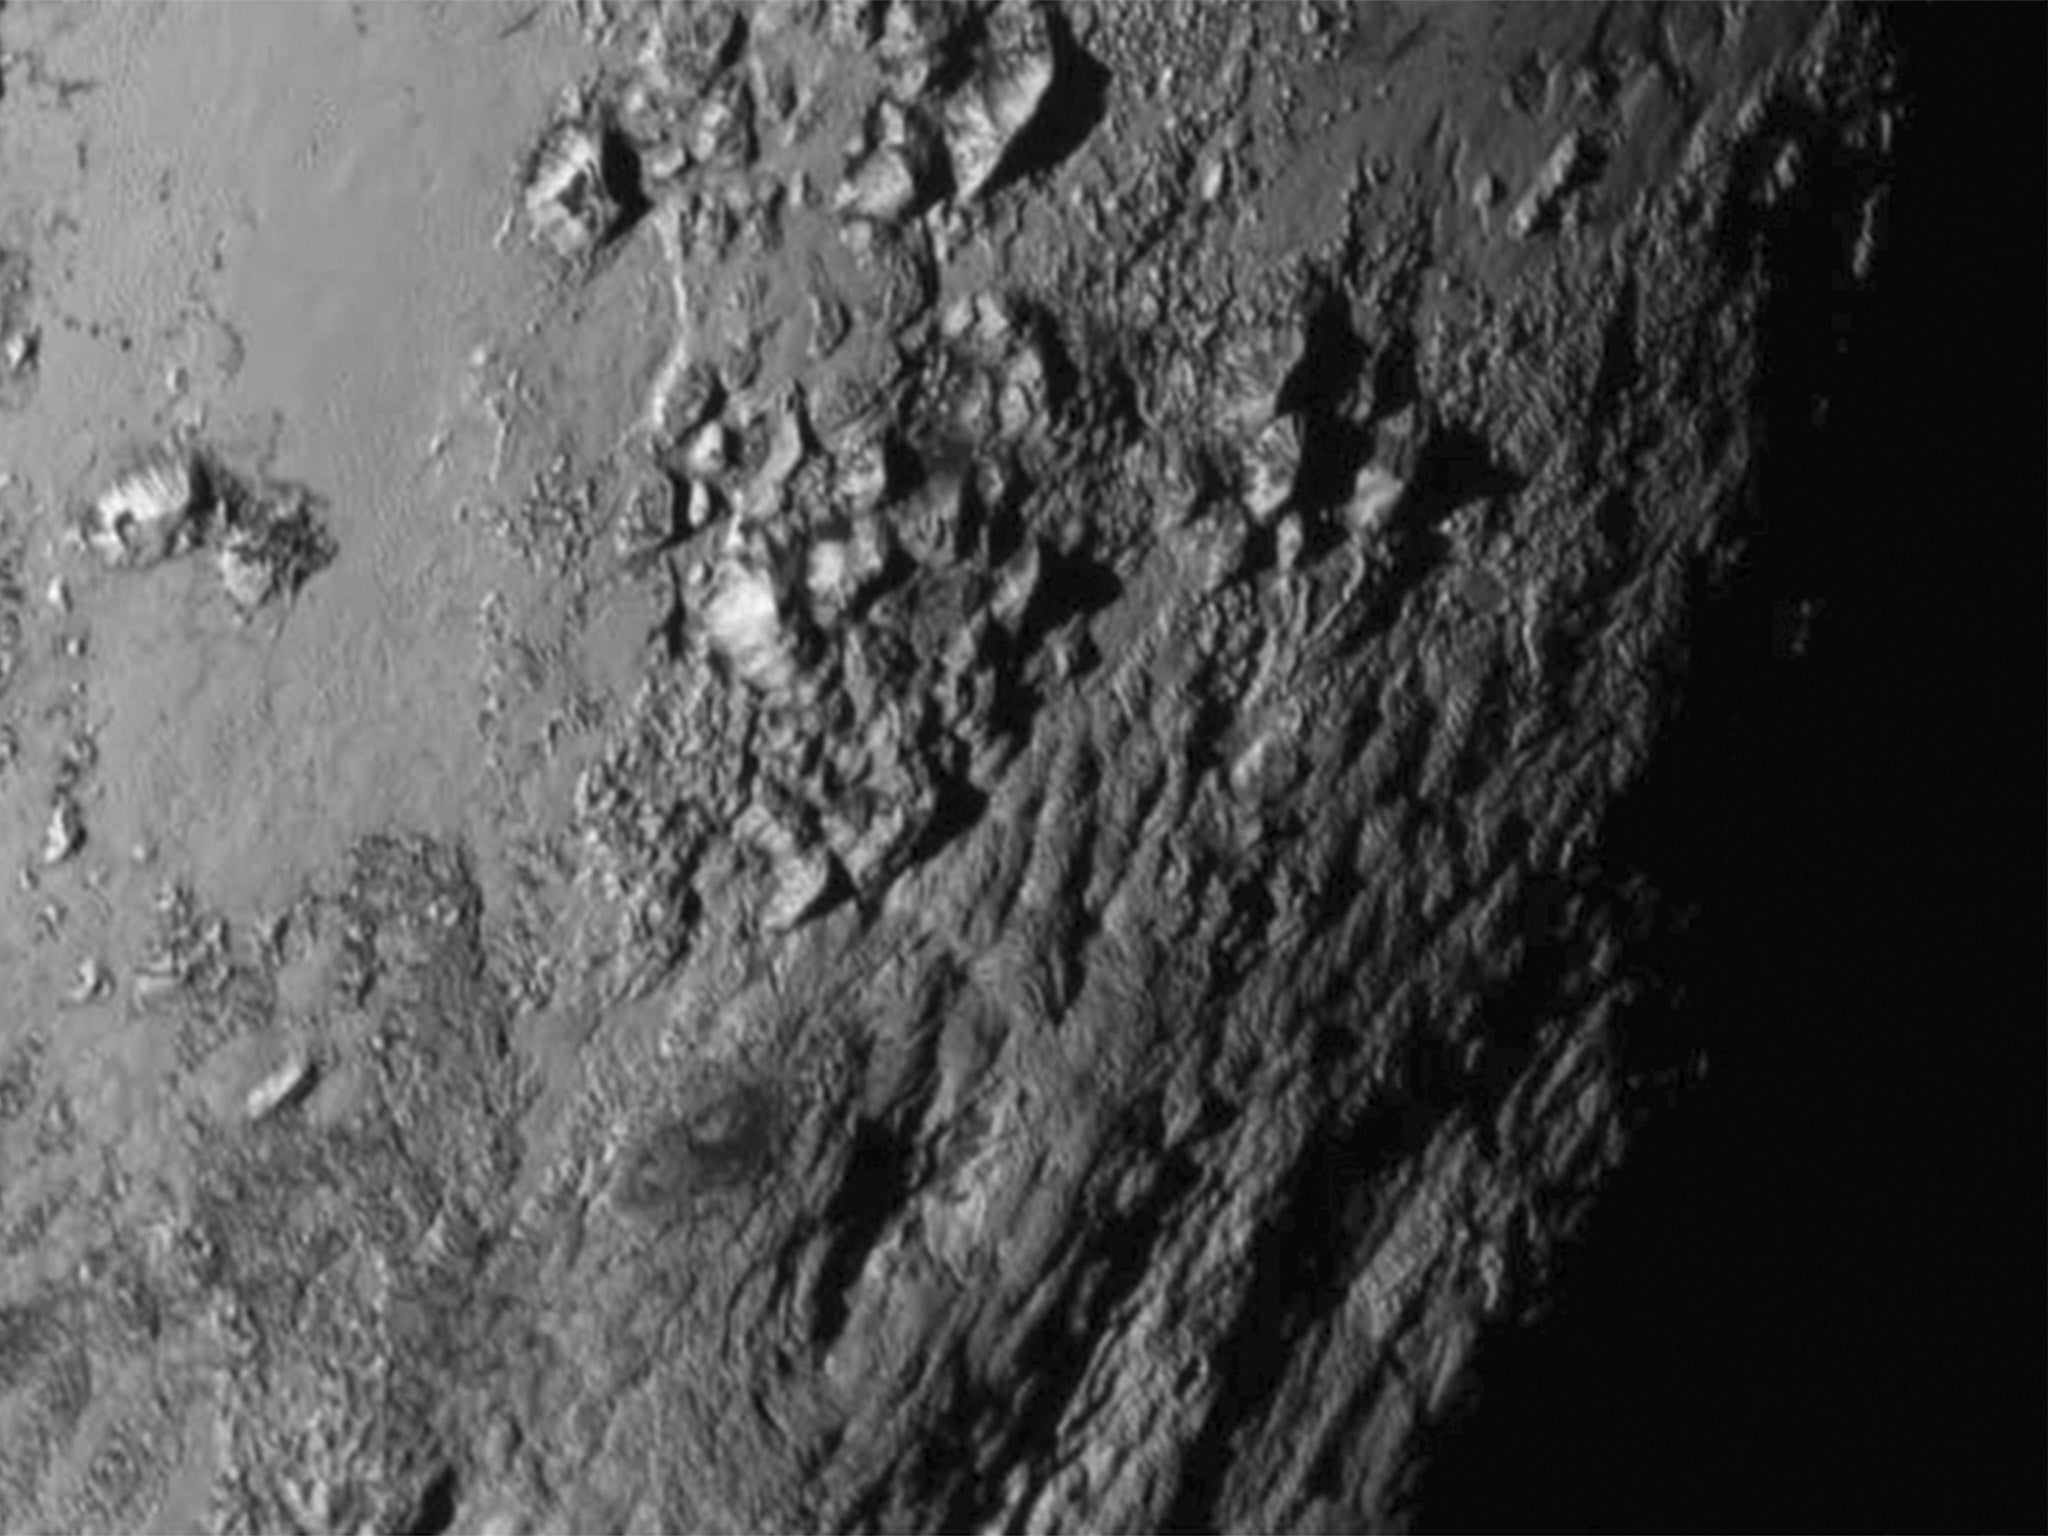 A close-up image of a region near Pluto's equator reveals a range of youthful mountains rising as high as 11,000 feet (3,500 meters) above the surface of the icy body